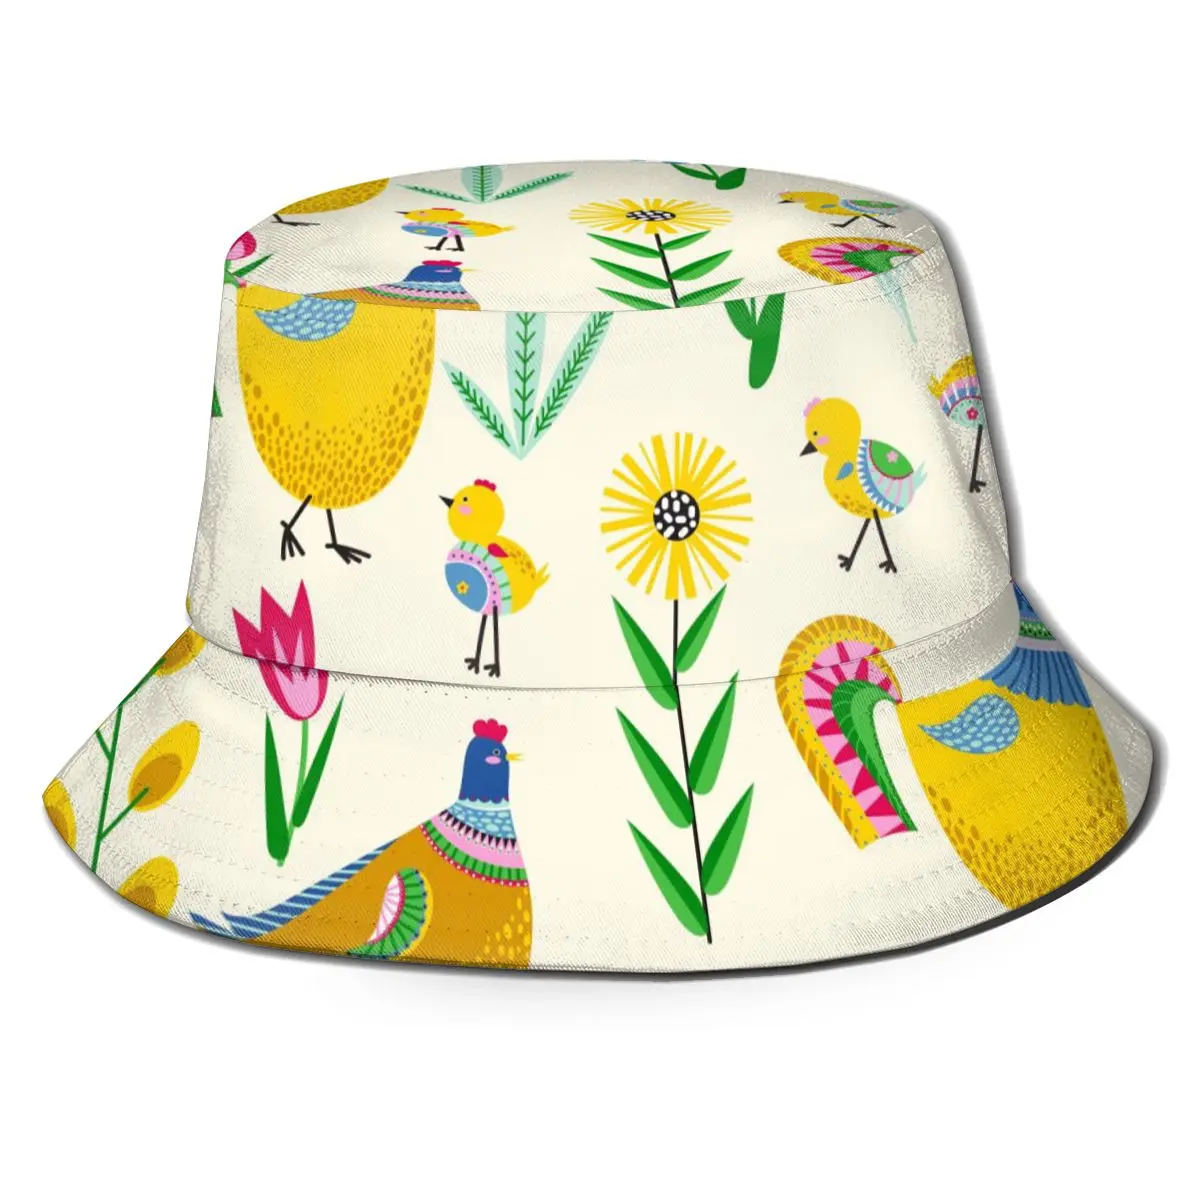 

Chicken Rooster And Flowers Yellow Illustration Bucket Hat Summer Hats Fisherman Hat Foldable Women Men Sunscreen Shade Caps